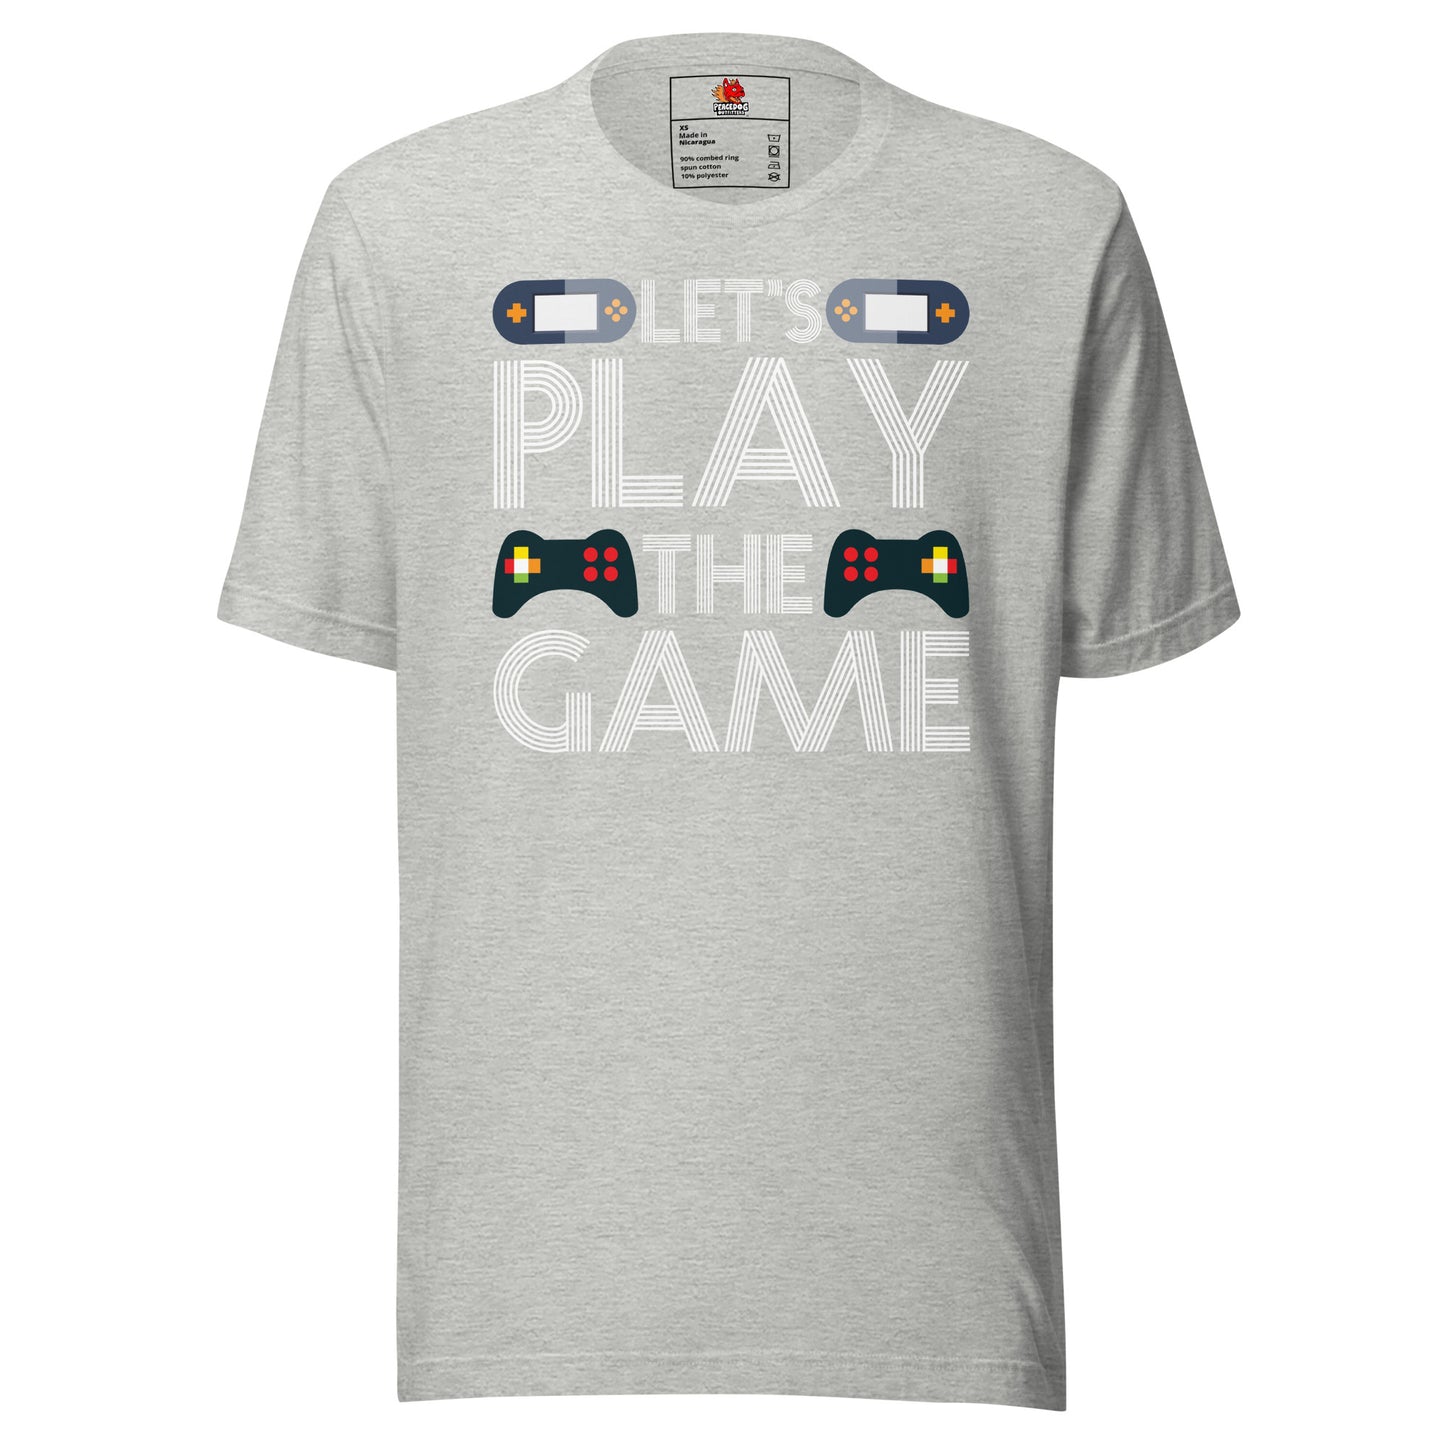 Let's Play the Game T-shirt